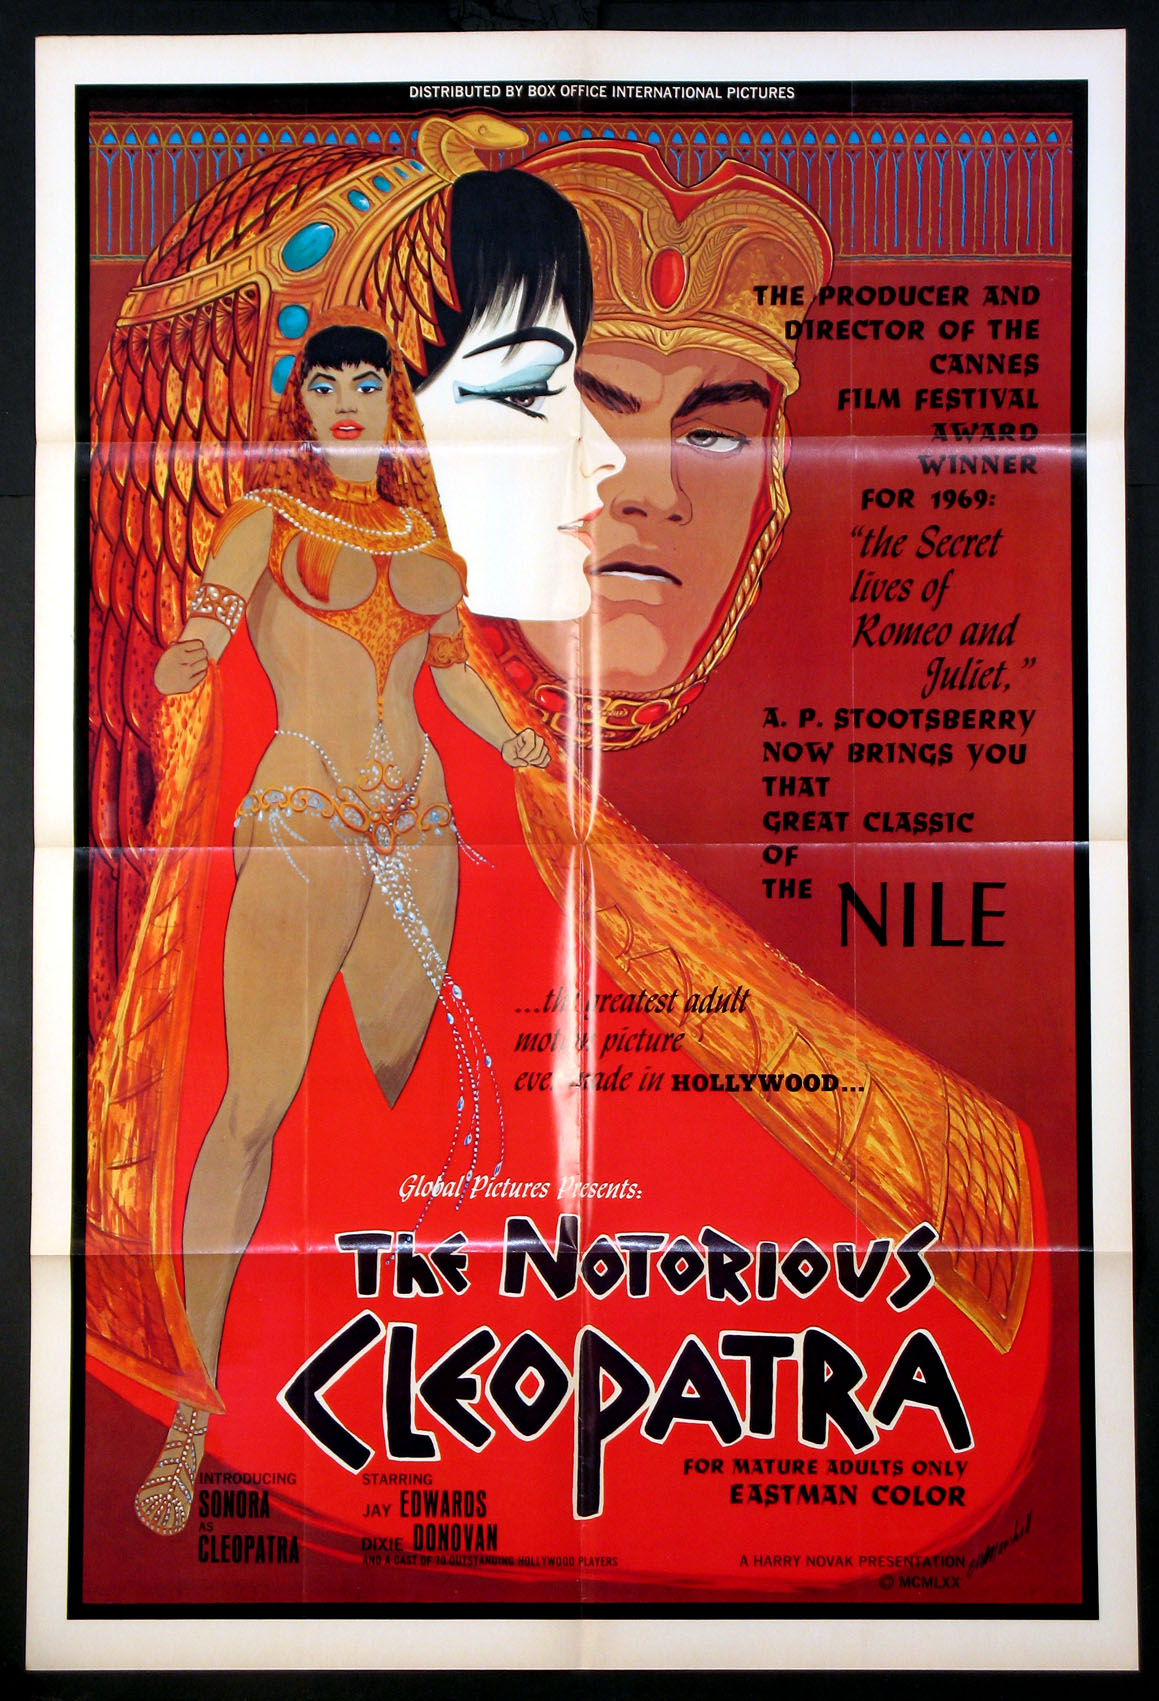 dave tormey recommends cleopatra xxx movie pic